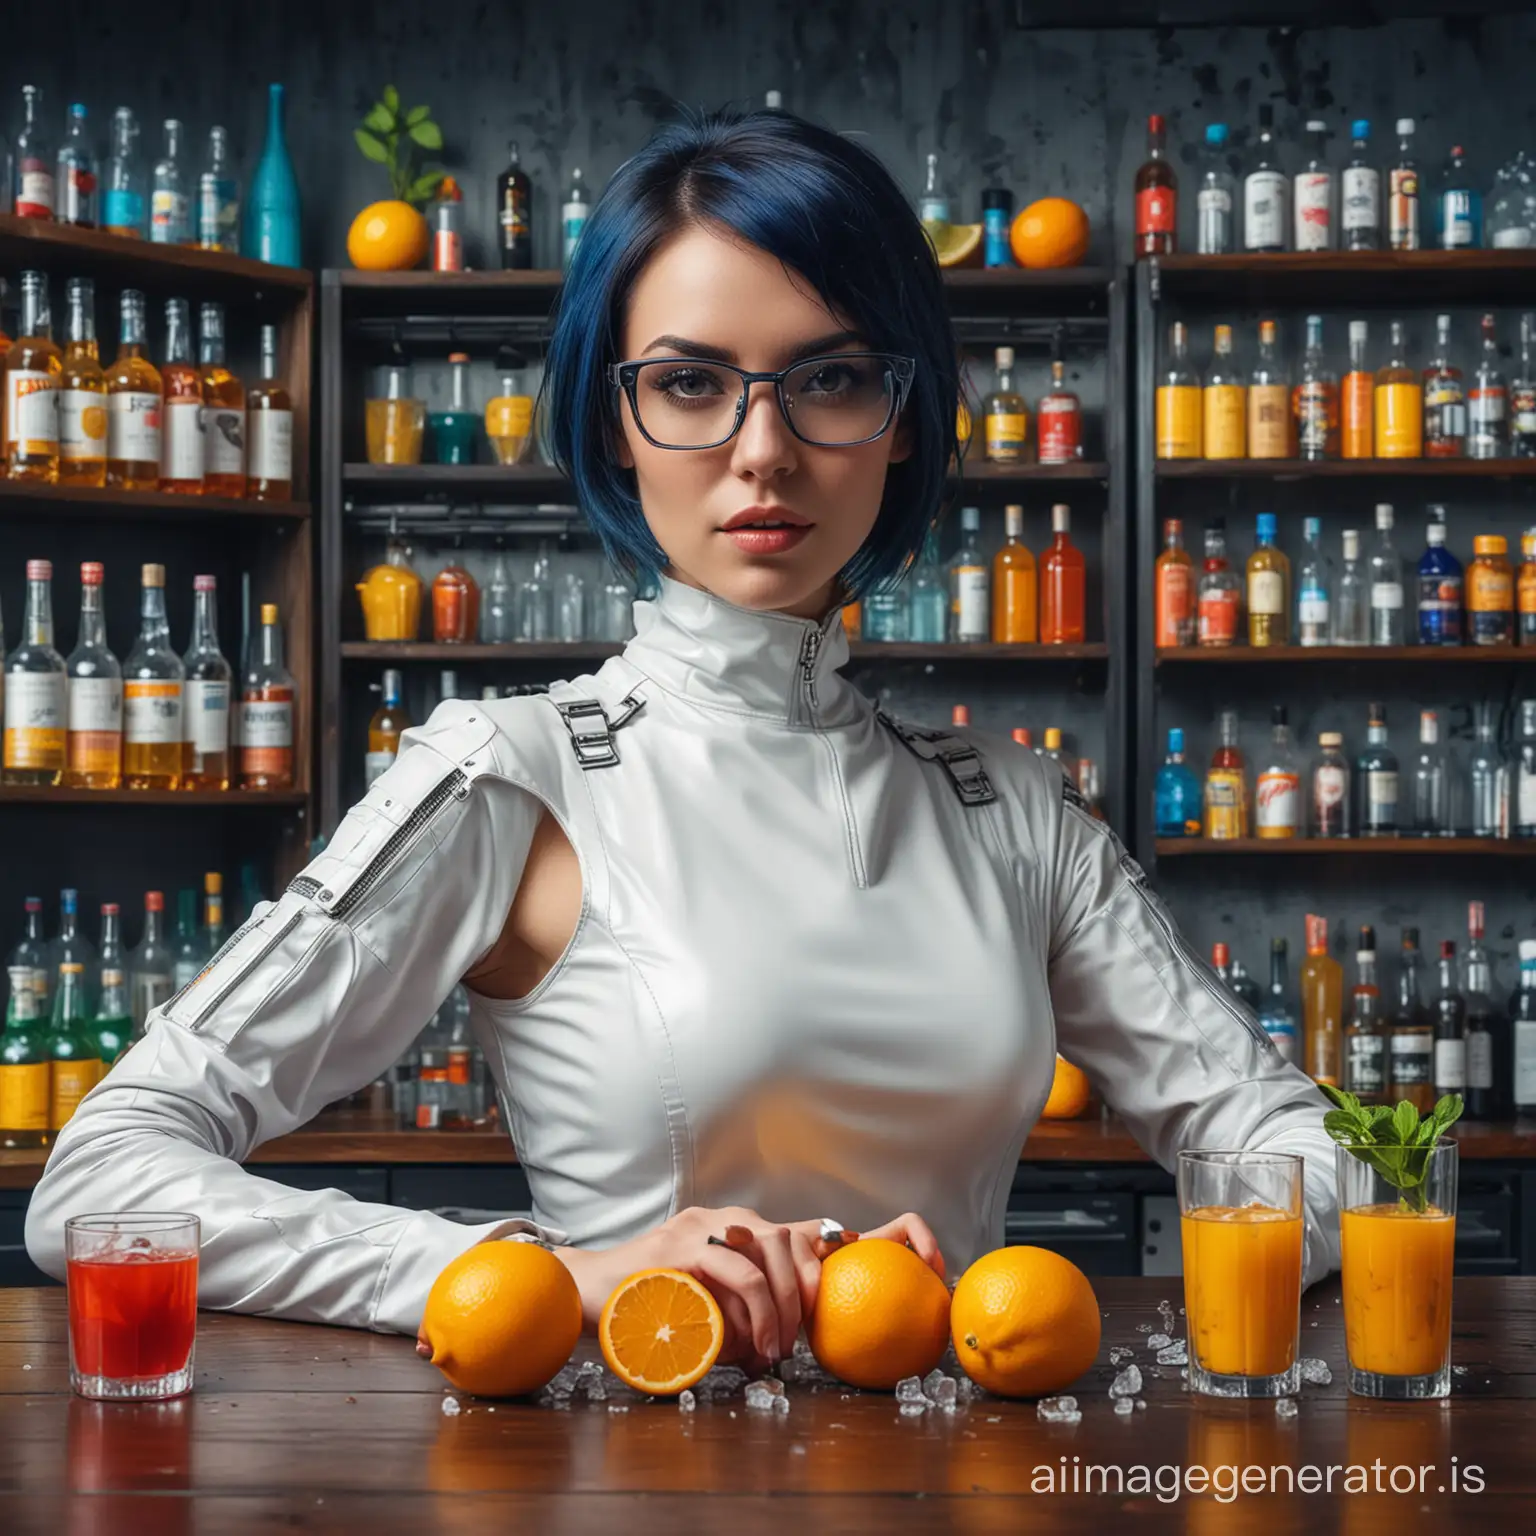 A close-up wide angle view of a lovely short hair brunette bar woman behind her cyber bar in a cybernetic white suit and a leather apron, she is pressing in one hand a lemon and in the other hand an orange in two glasses the first one is yellow and the other one is orange, there are six glasses of colored drinks on the bar and a lot of multicolor bottles of different shapes and brands on the two shelves on her sides, the colored drink are yellow, orange, red and green with some ice cubes, some fruits and some mint leaves in them, the glasses are quite large and short for cocktails, they are color splash behind the woman, the walls are gradient colored from dark blue to magenta, the ceiling is dark blue, cyberpunk design, psychedelic art, highly detailed, digital painting, oil painting, poster art, colorful, high-res, high-quality.